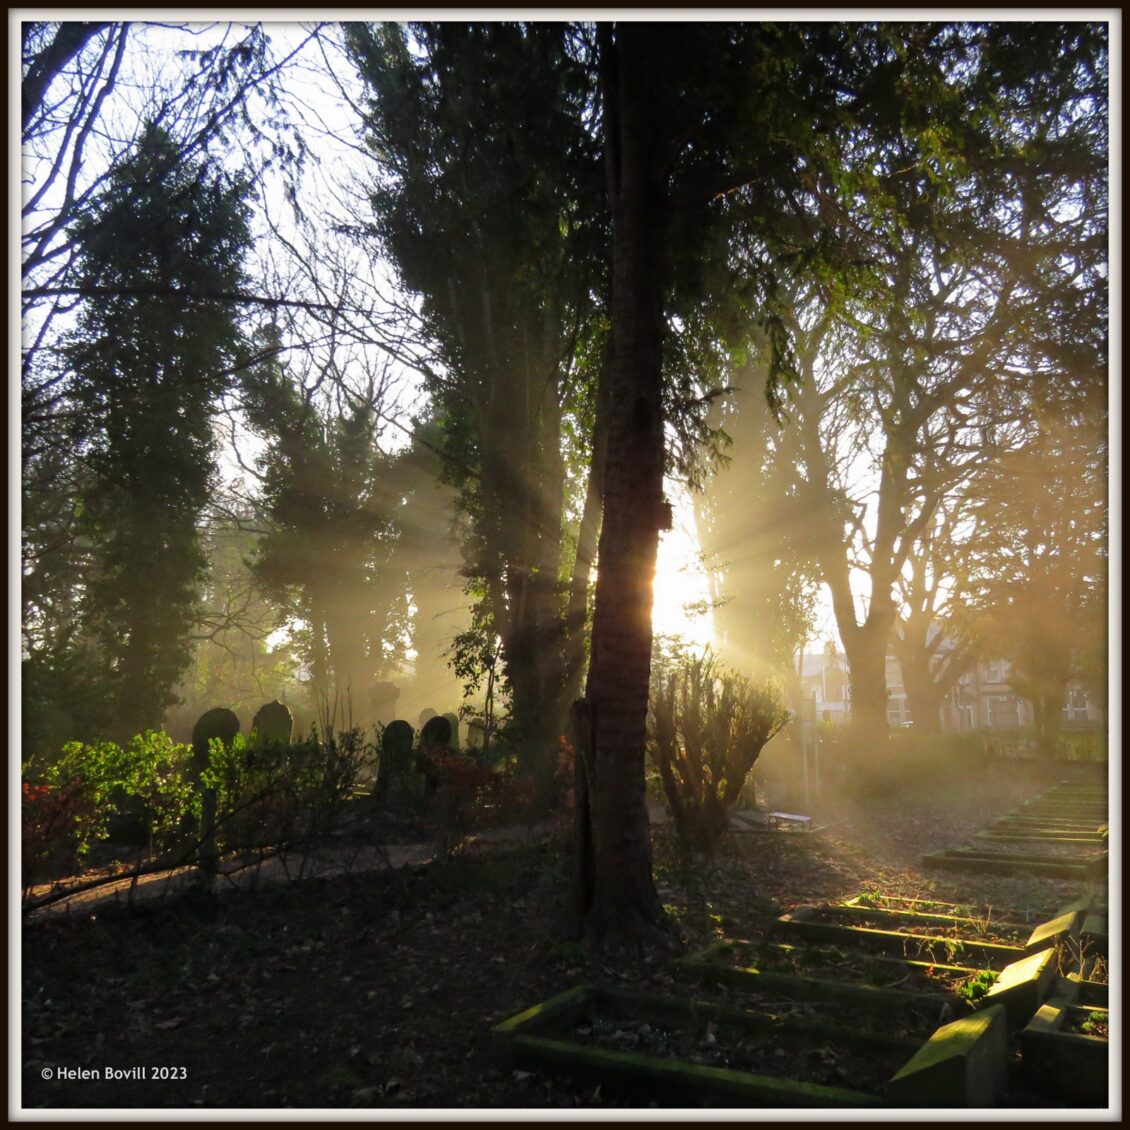 Shafts of sunlight illuminate the Quaker Burial Ground early in the morning